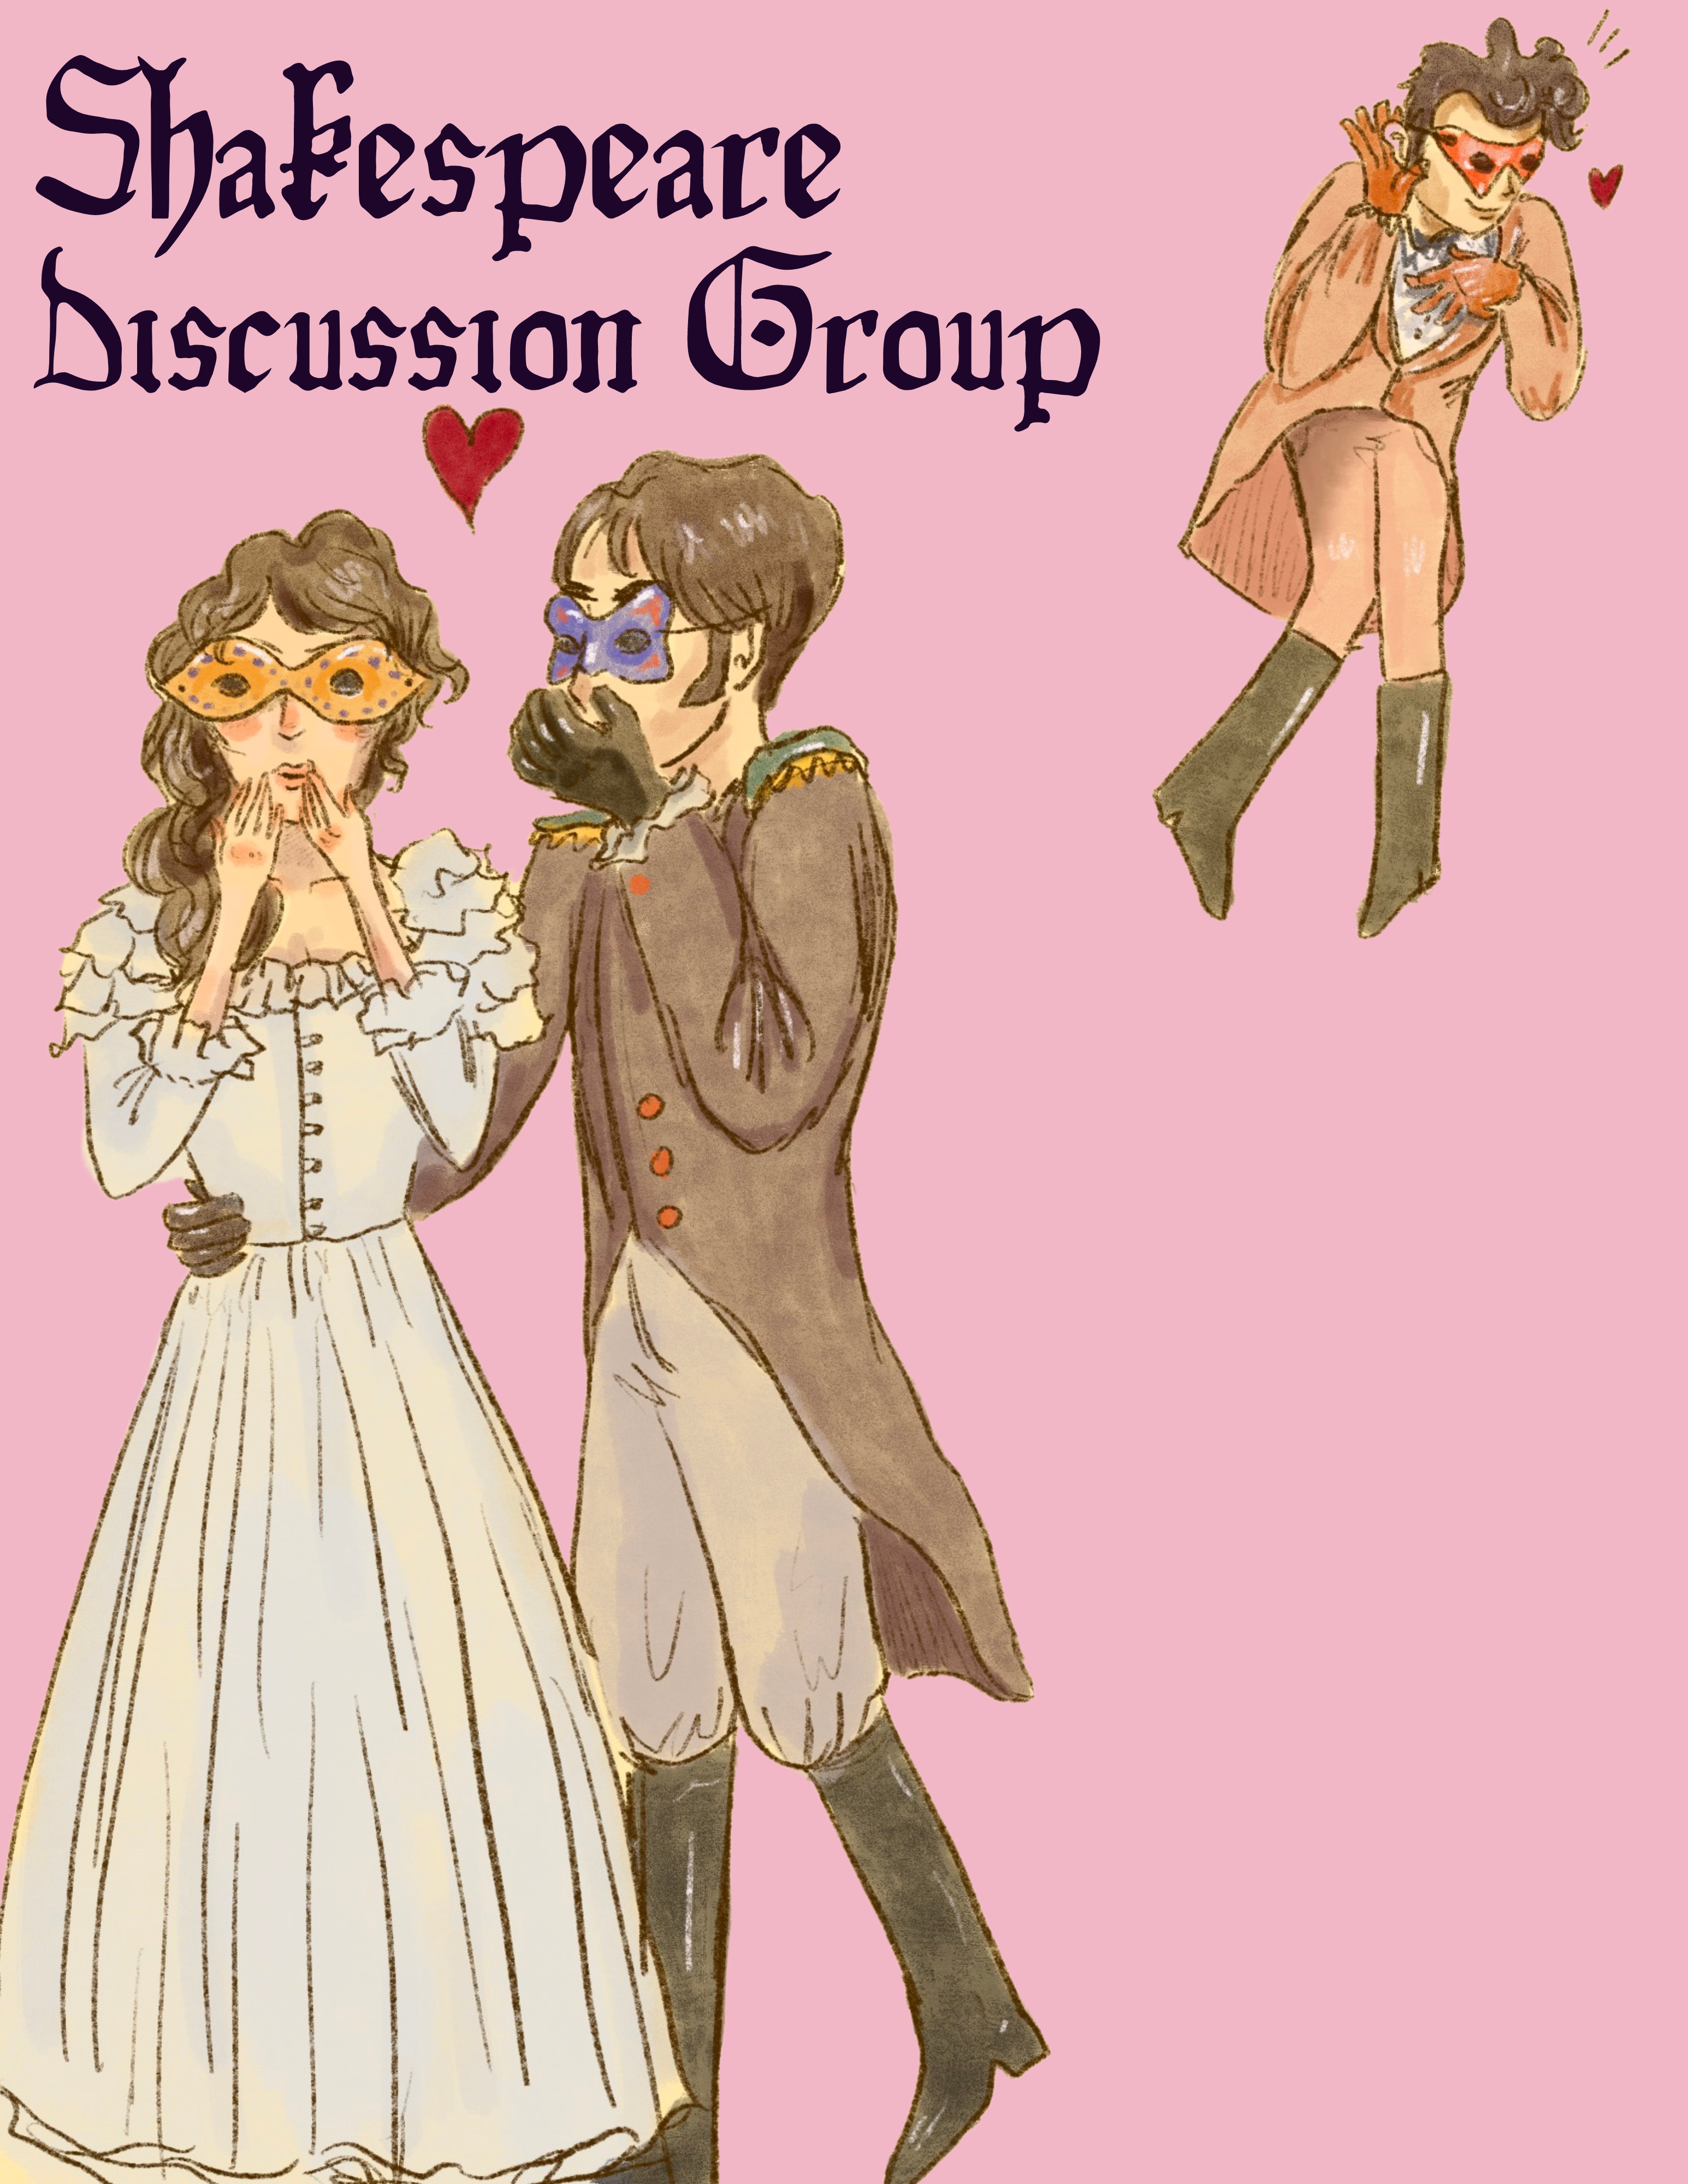 Shakespeare Discussion Group Man and woman in formal dress and masks, a man on corner of image in formal dress and mask hearts